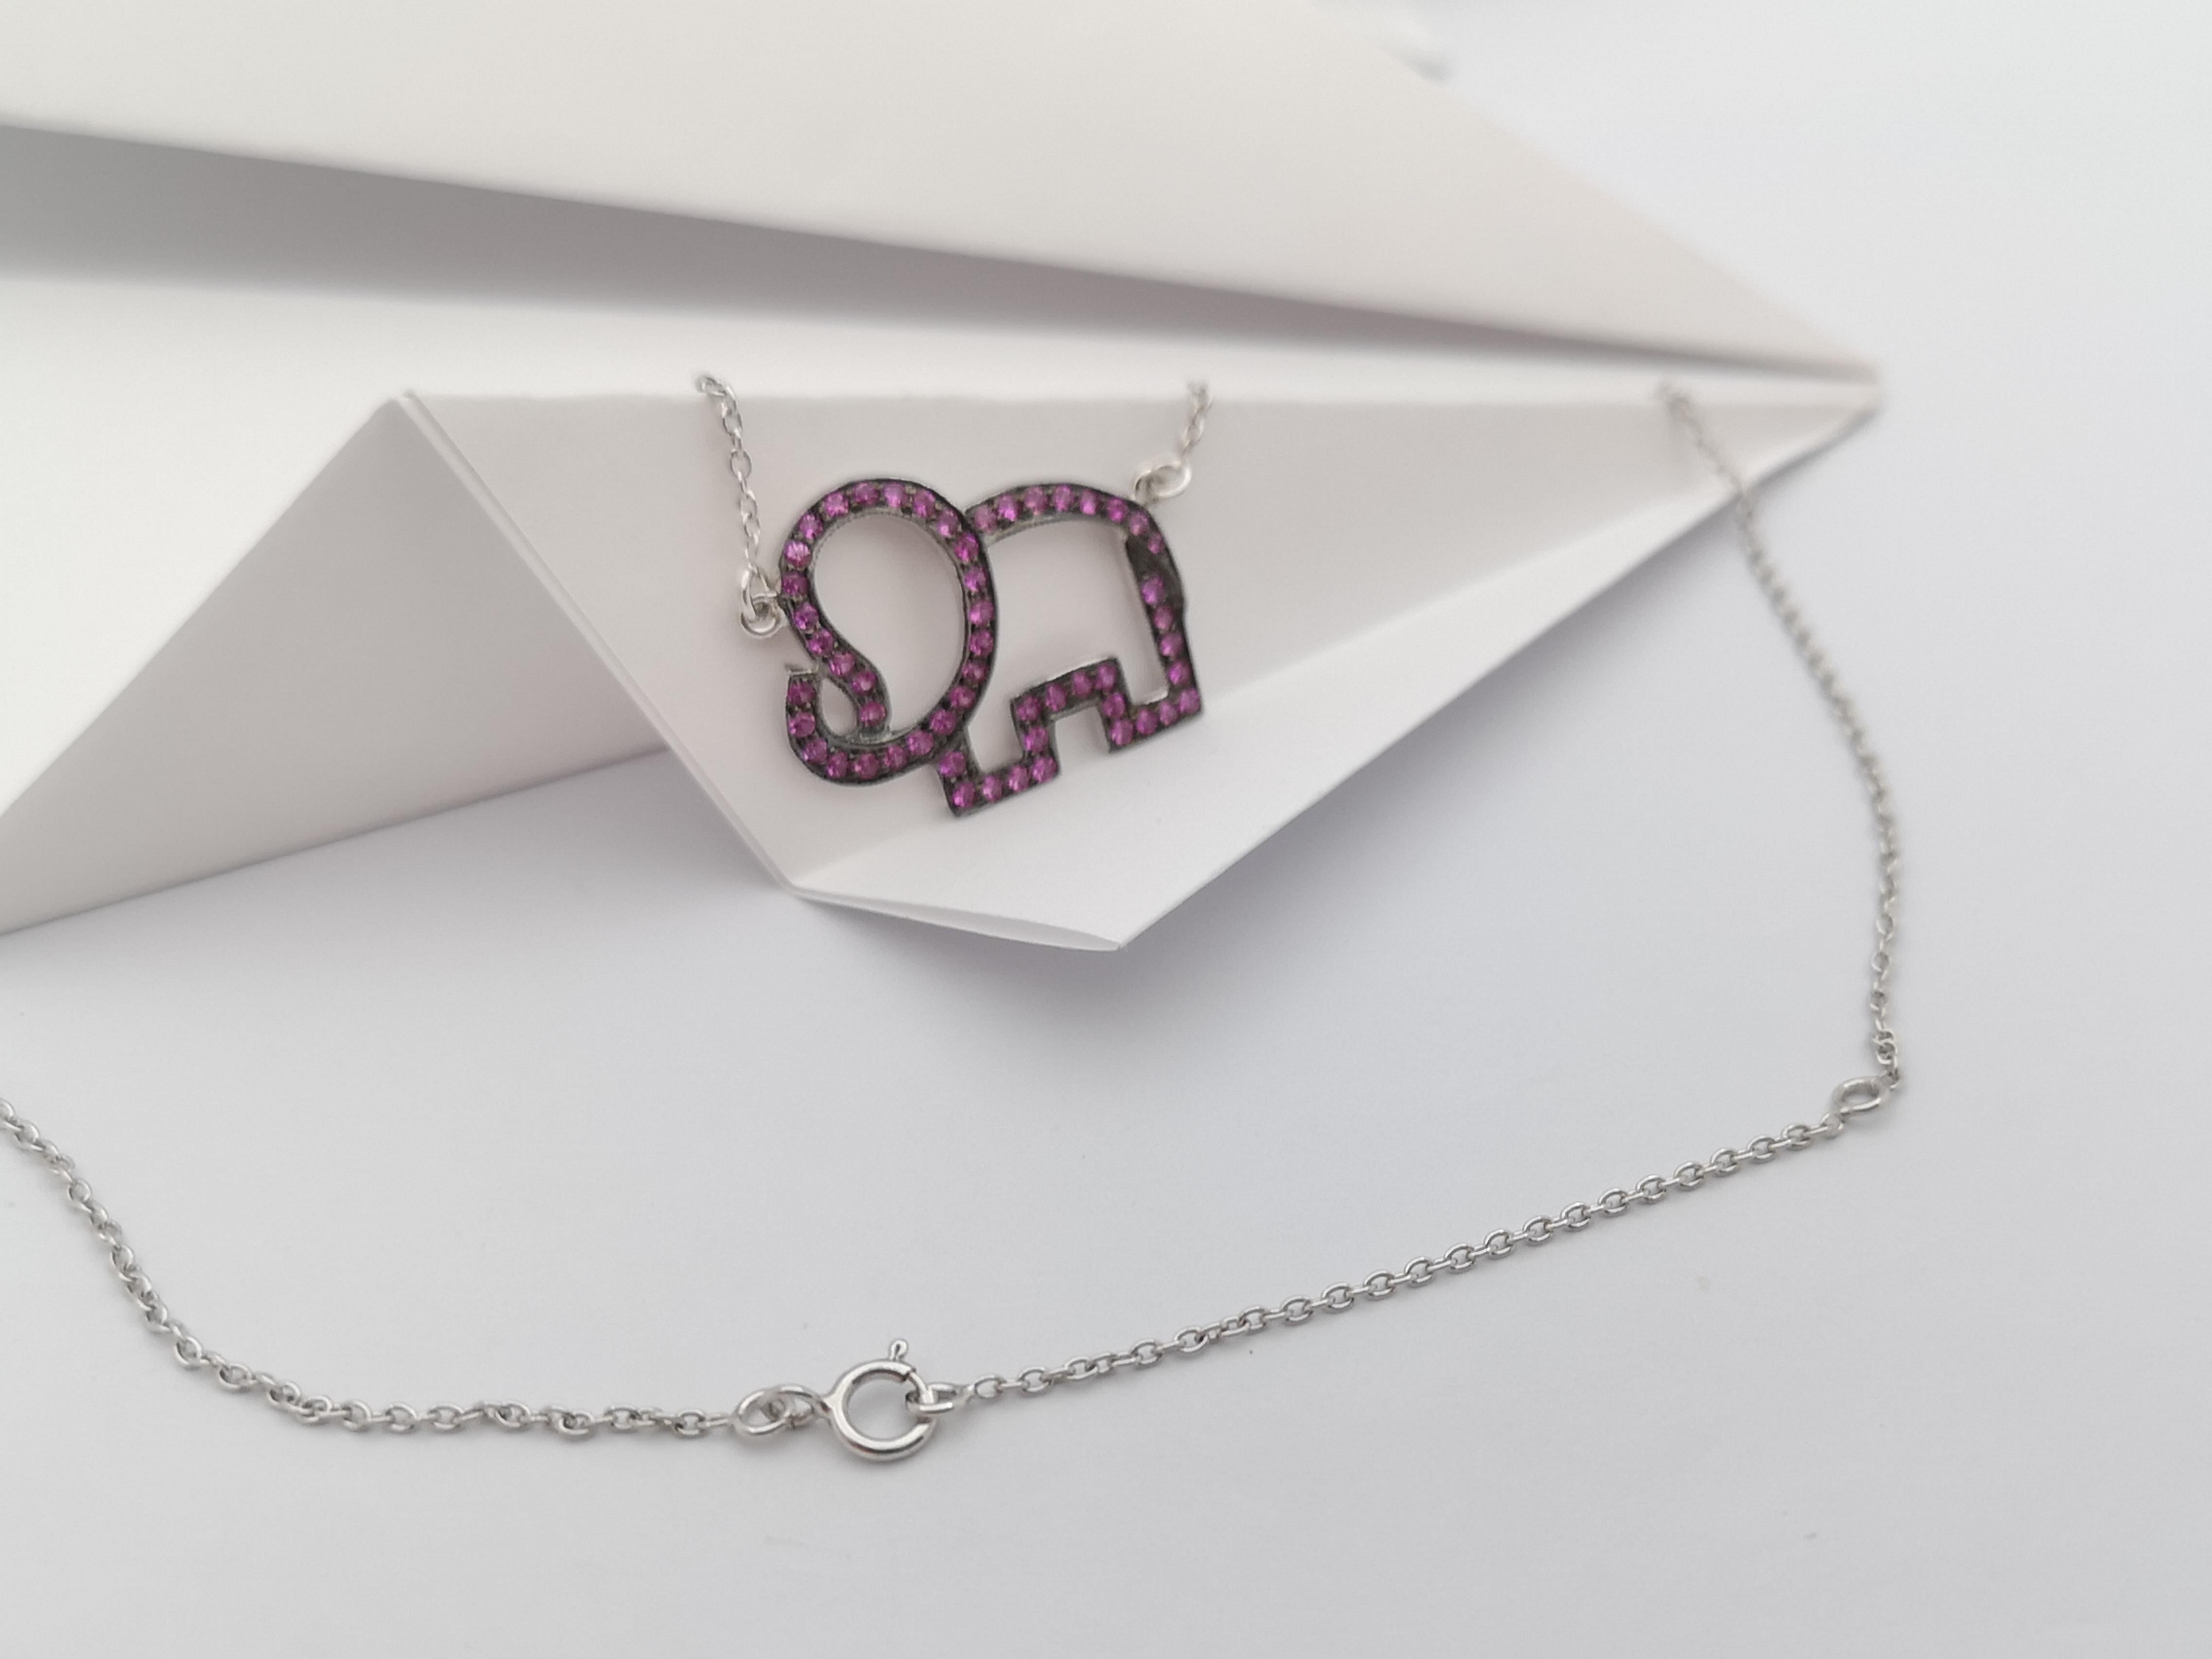 Pink Sapphire Necklace set in Silver Settings

Width:  1.9 cm 
Length:  45.5 cm
Total Weight: 3.36 grams

*Please note that the silver setting is plated with rhodium to promote shine and help prevent oxidation.  However, with the nature of silver,